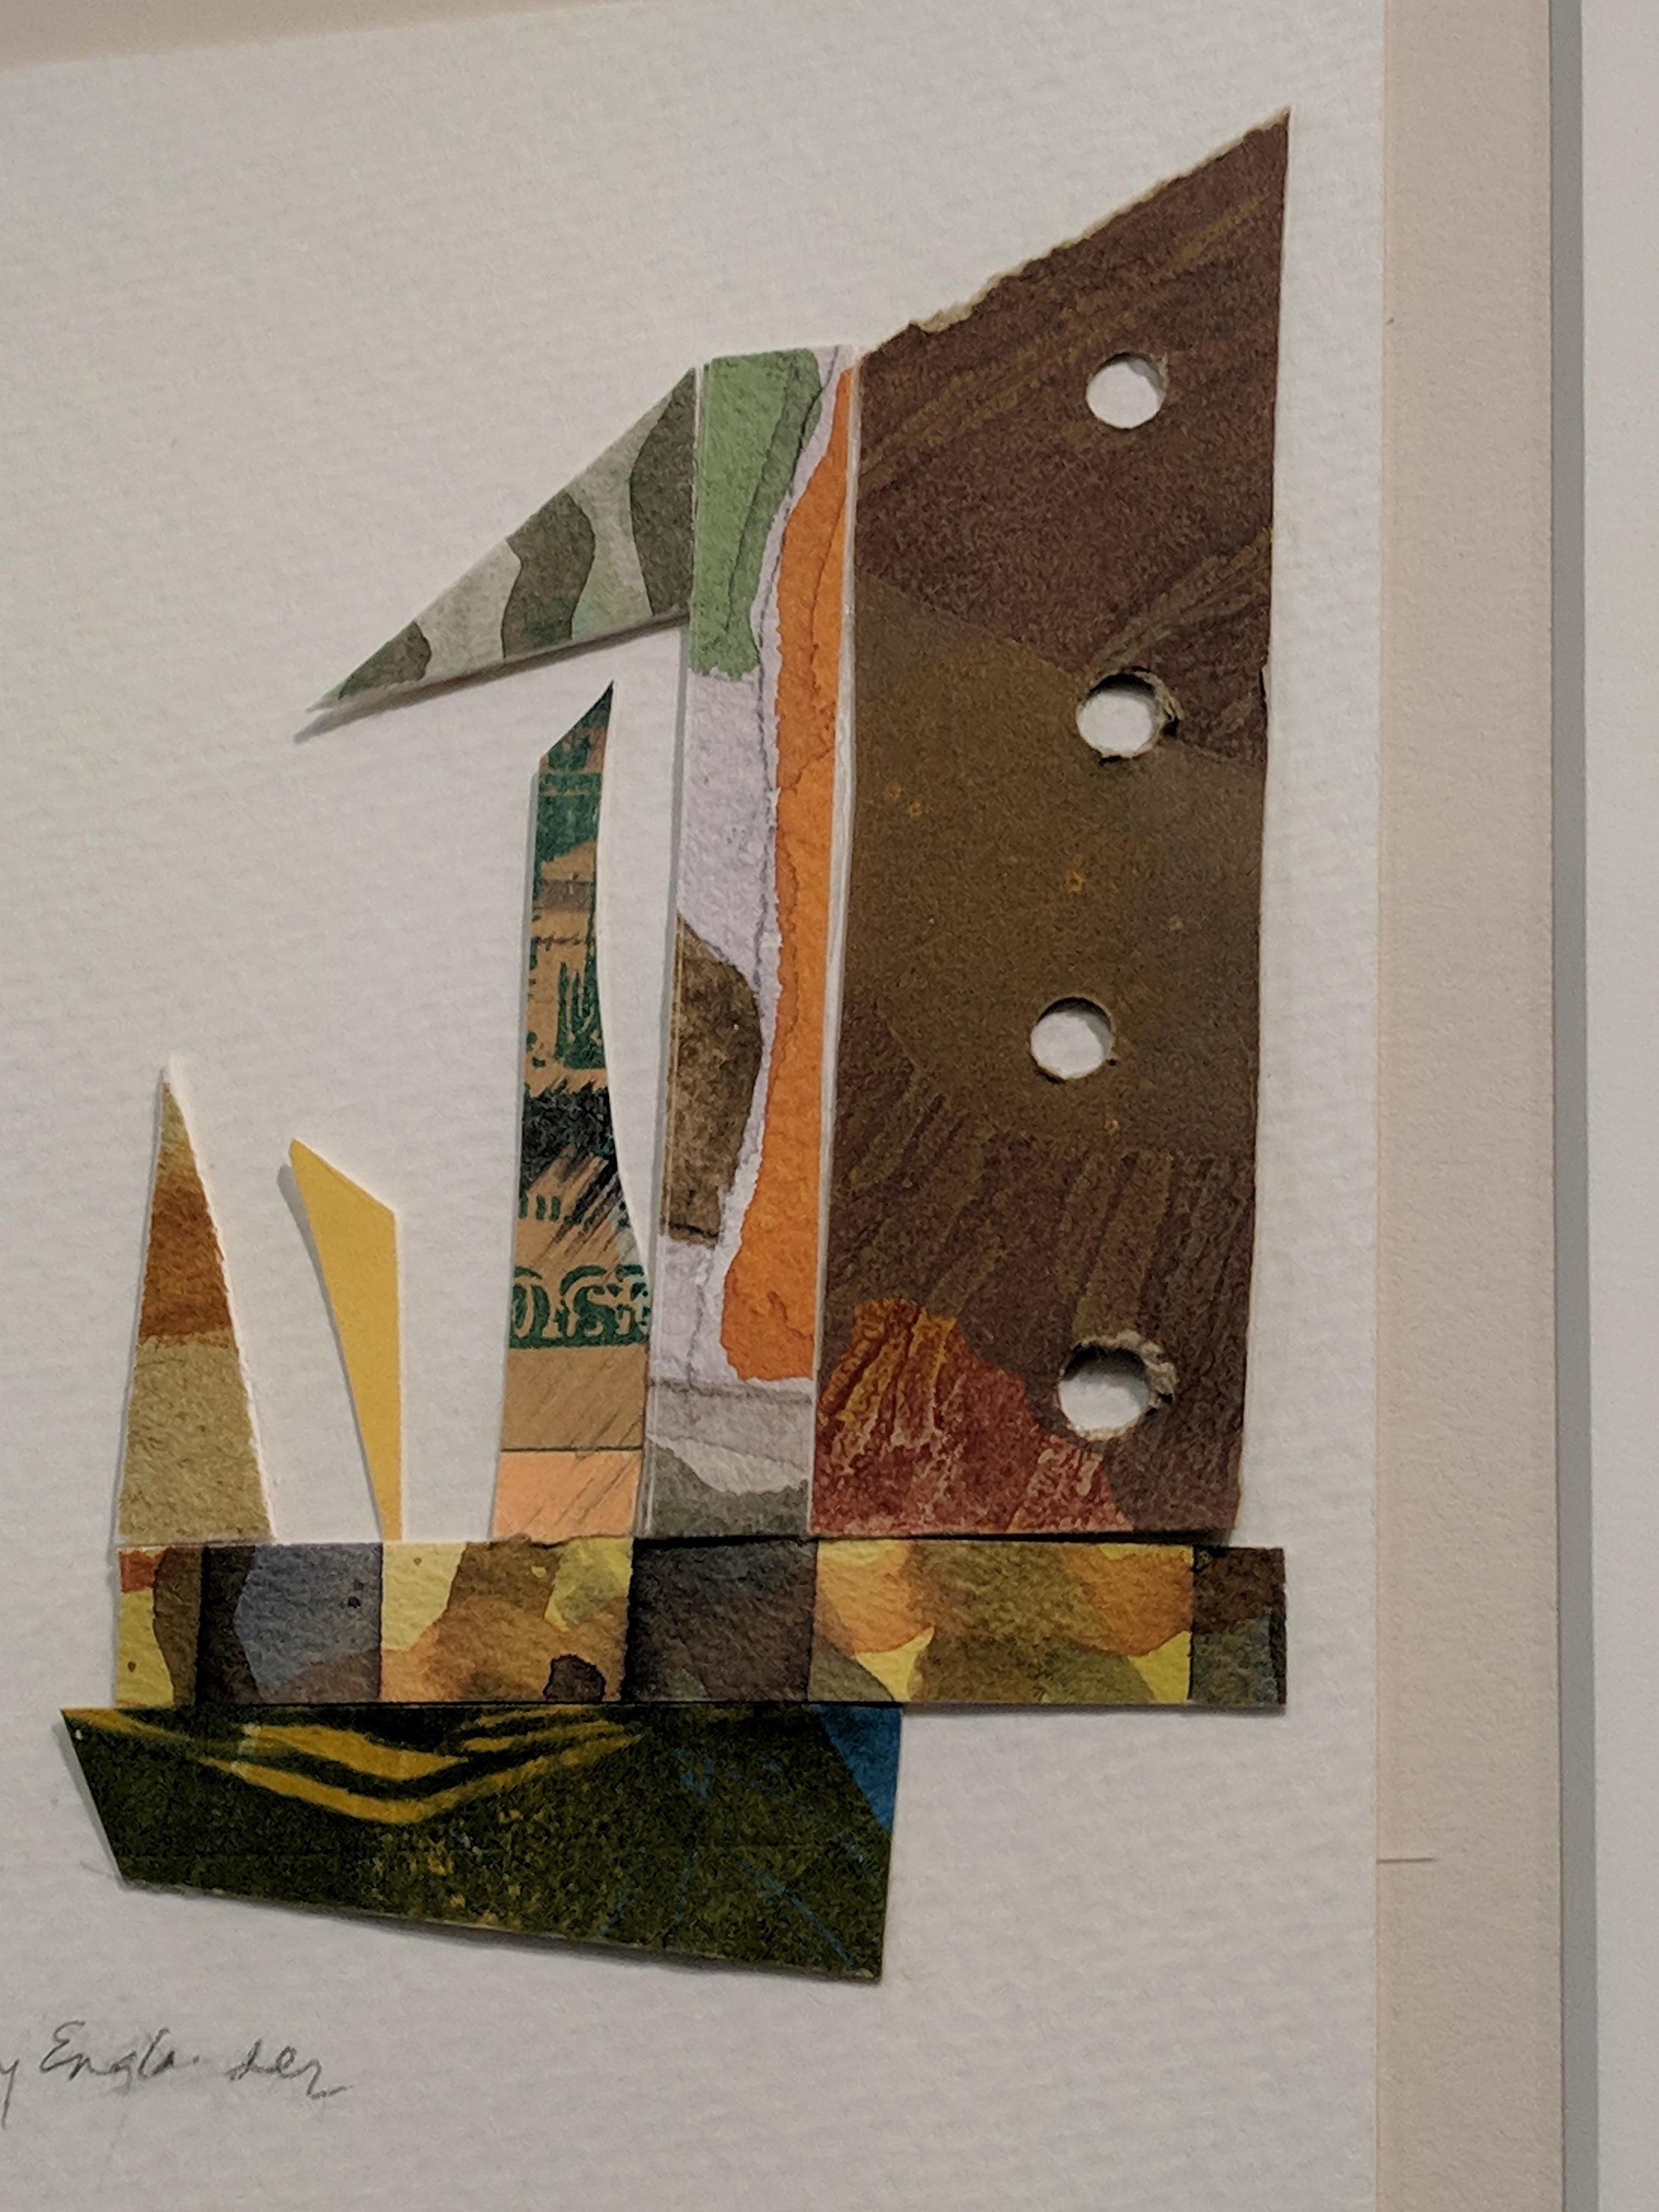 This mixed media collage is made of fragments from earlier works by the artist. The collage is set on watercolor paper, which floats within a mat centered in the frame. Green, yellow, and orange colors predominate, but the overall impression is of